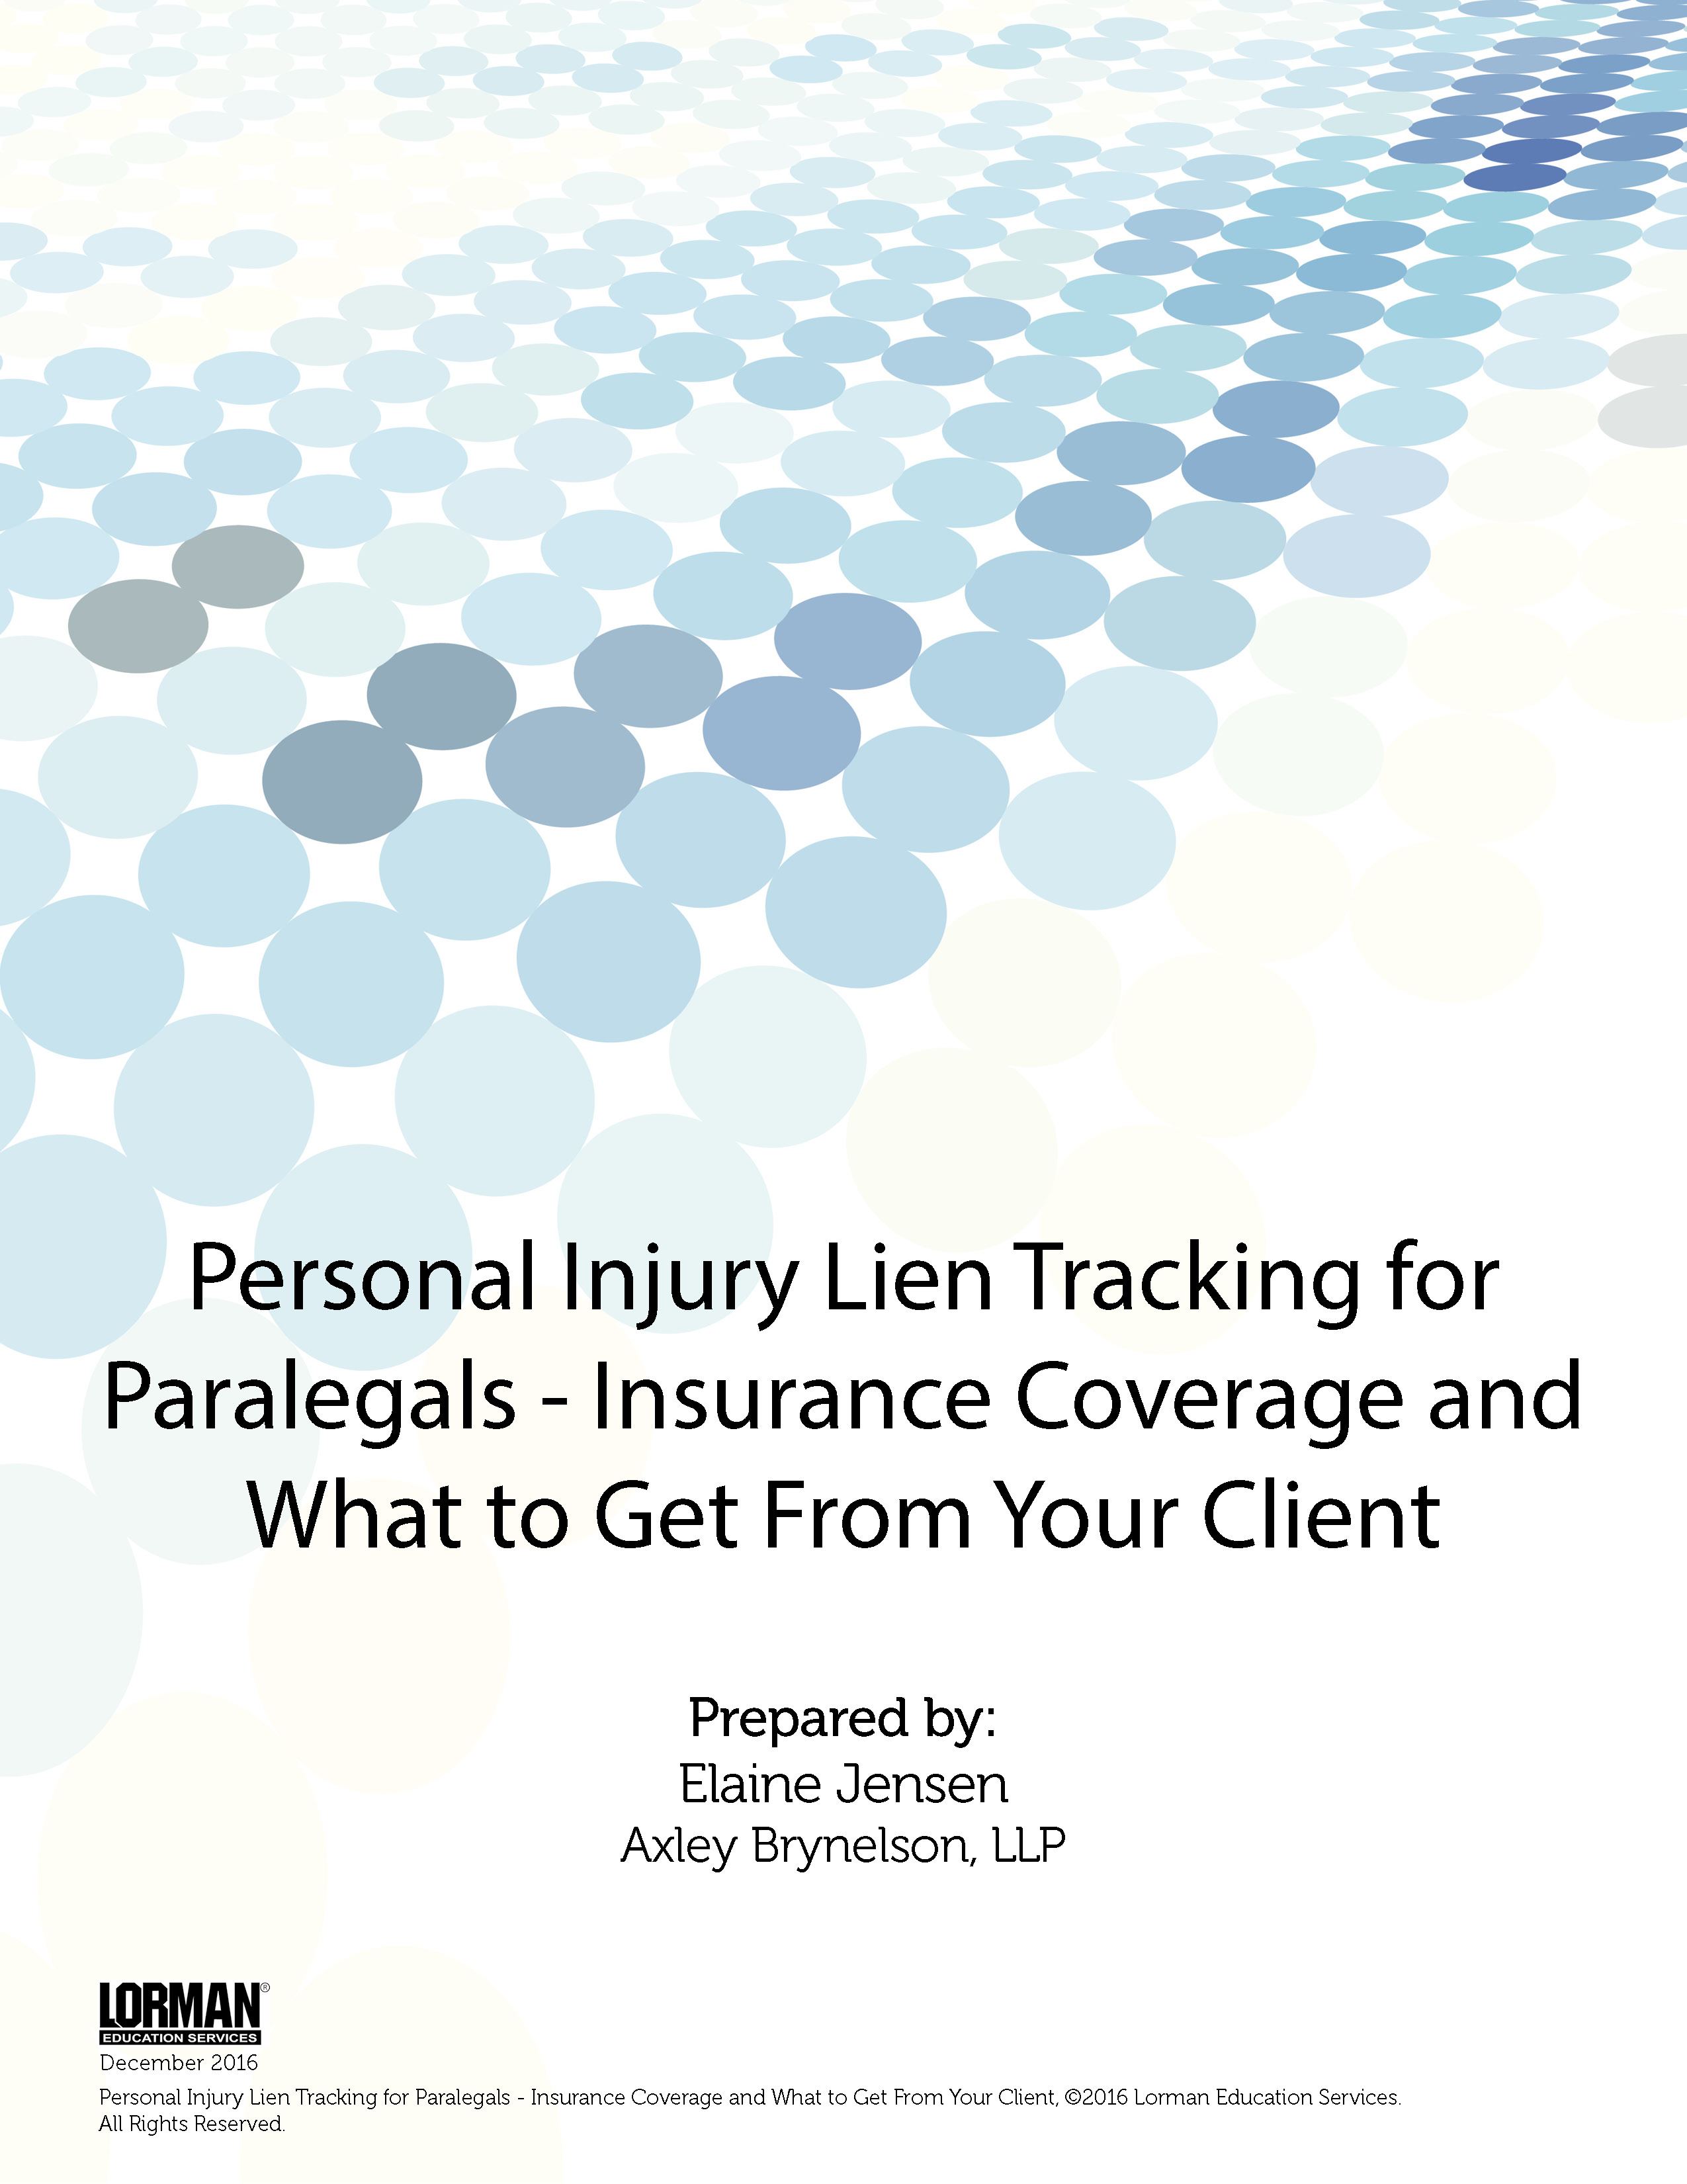 Personal Injury Lien Tracking for Paralegals - Insurance Coverage and What to Get From Your Client